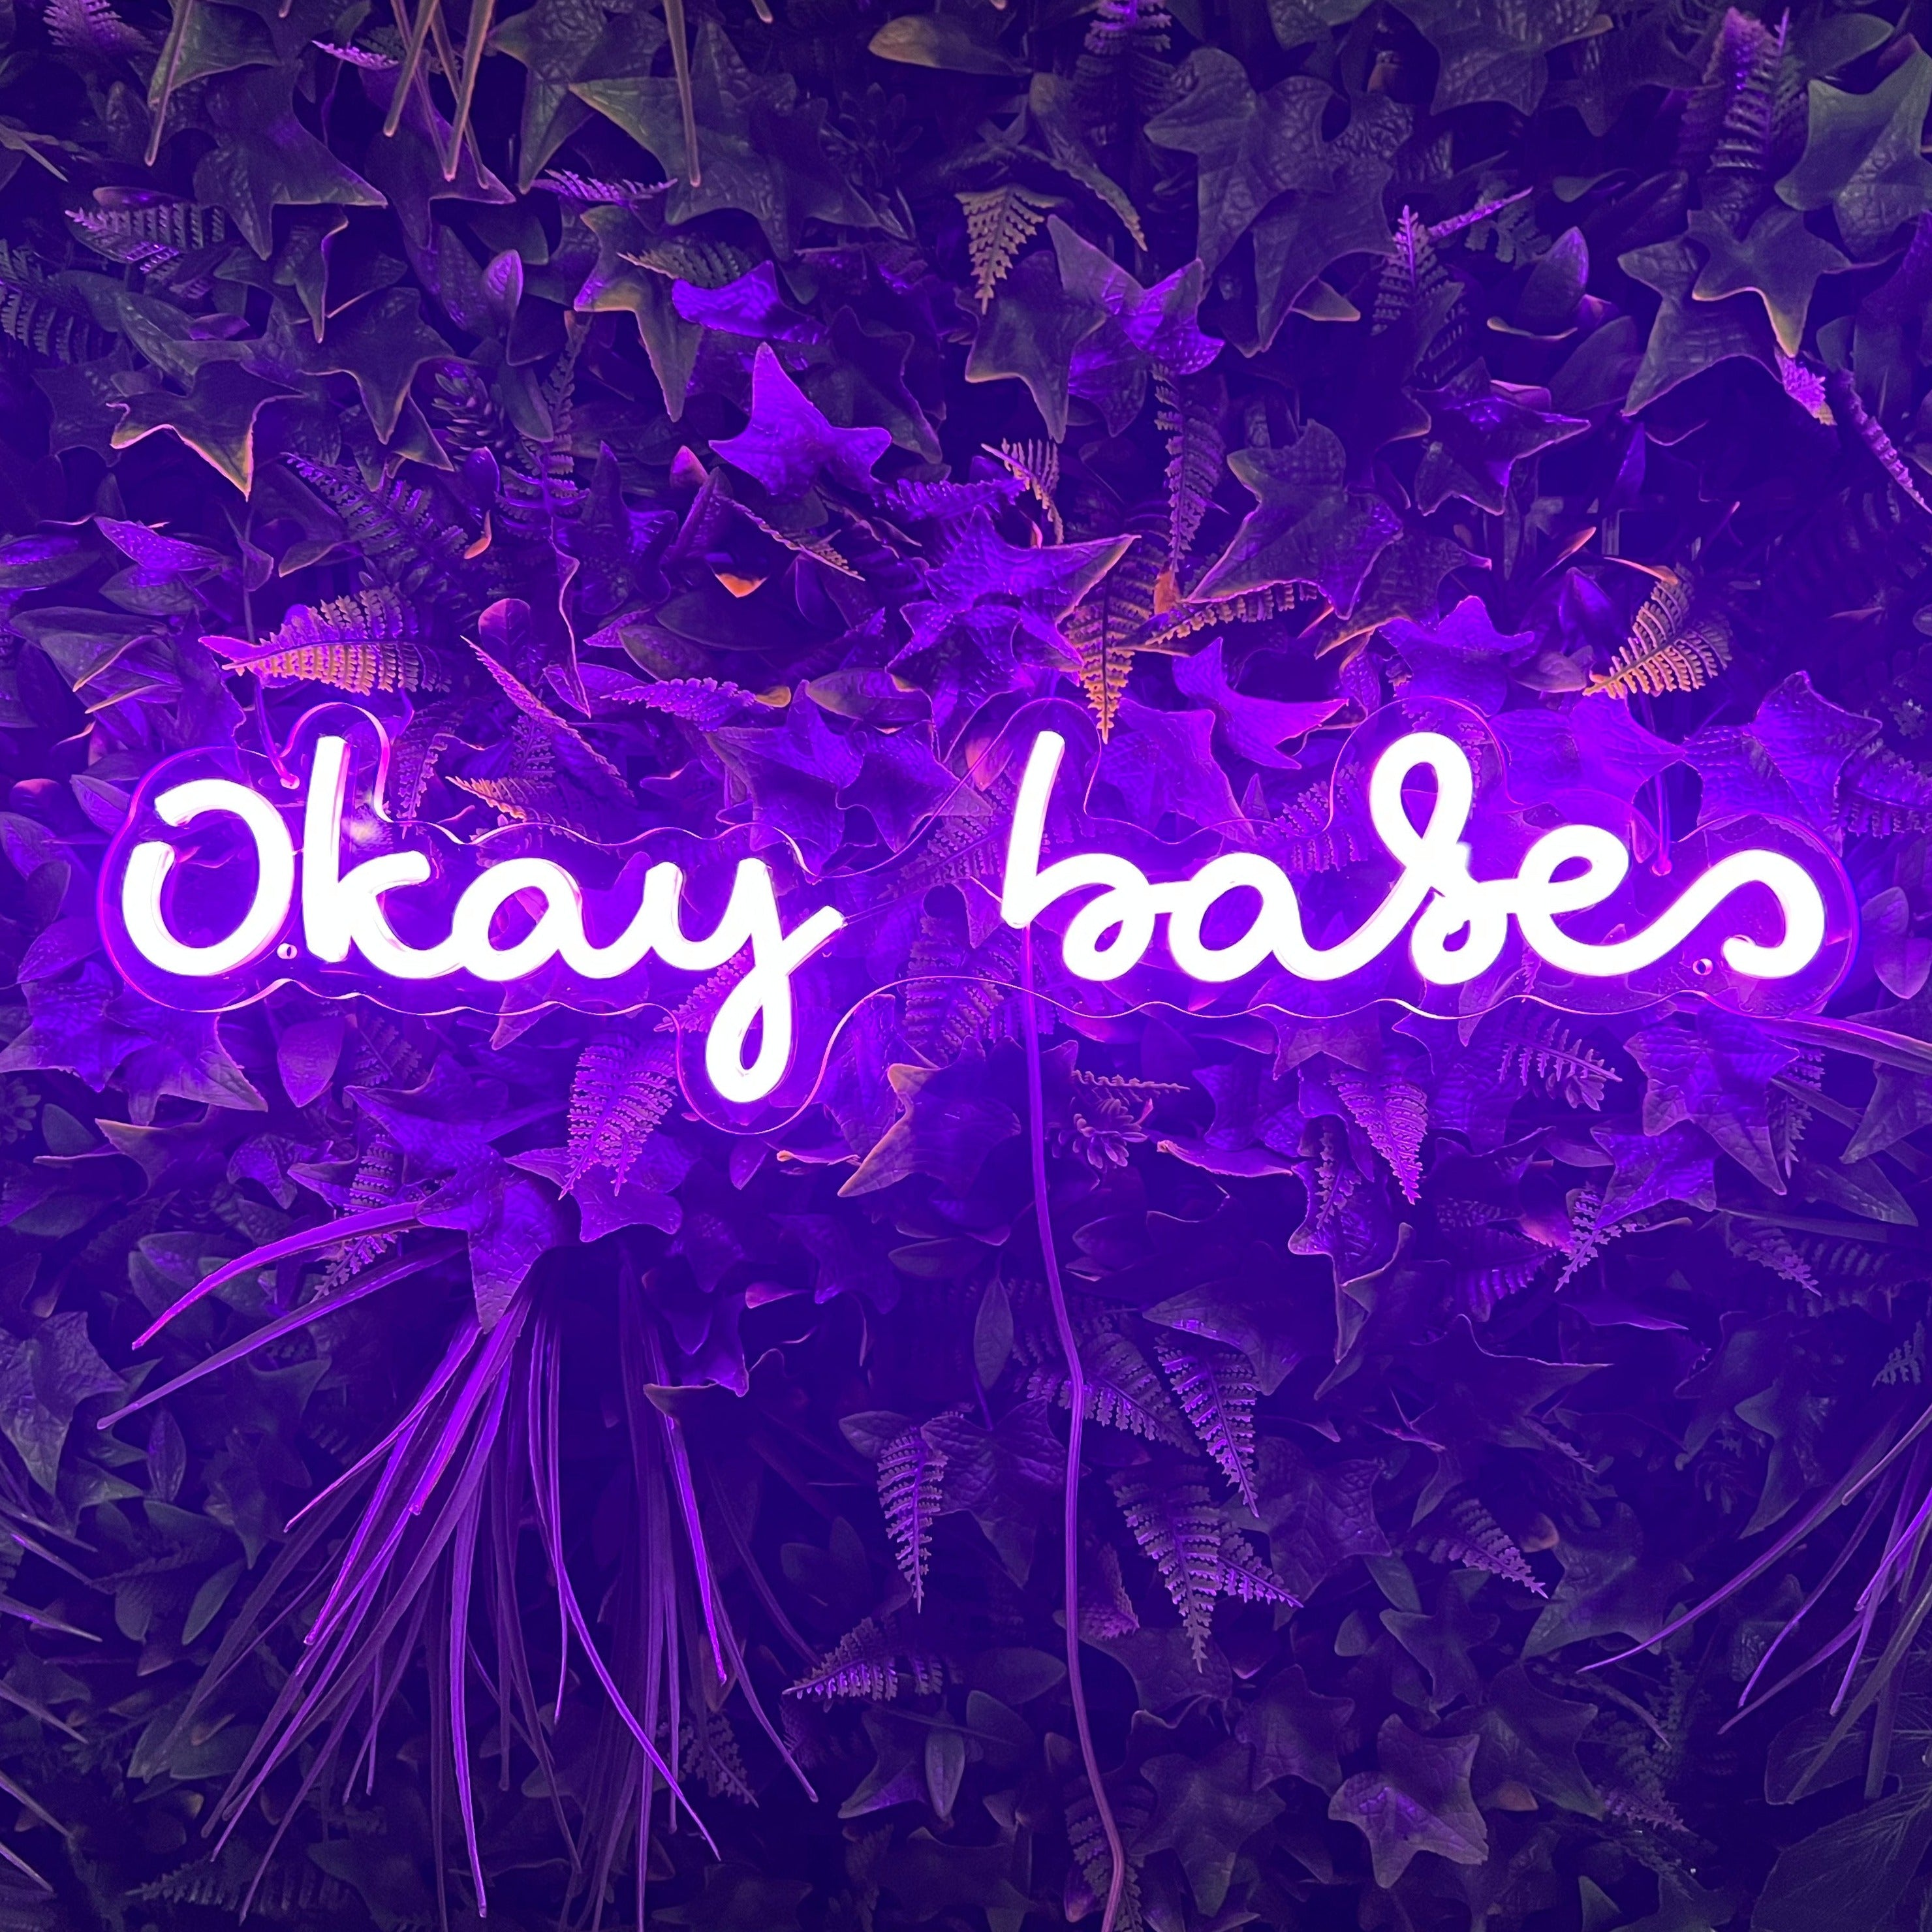 Okay babes neon sign in pink 